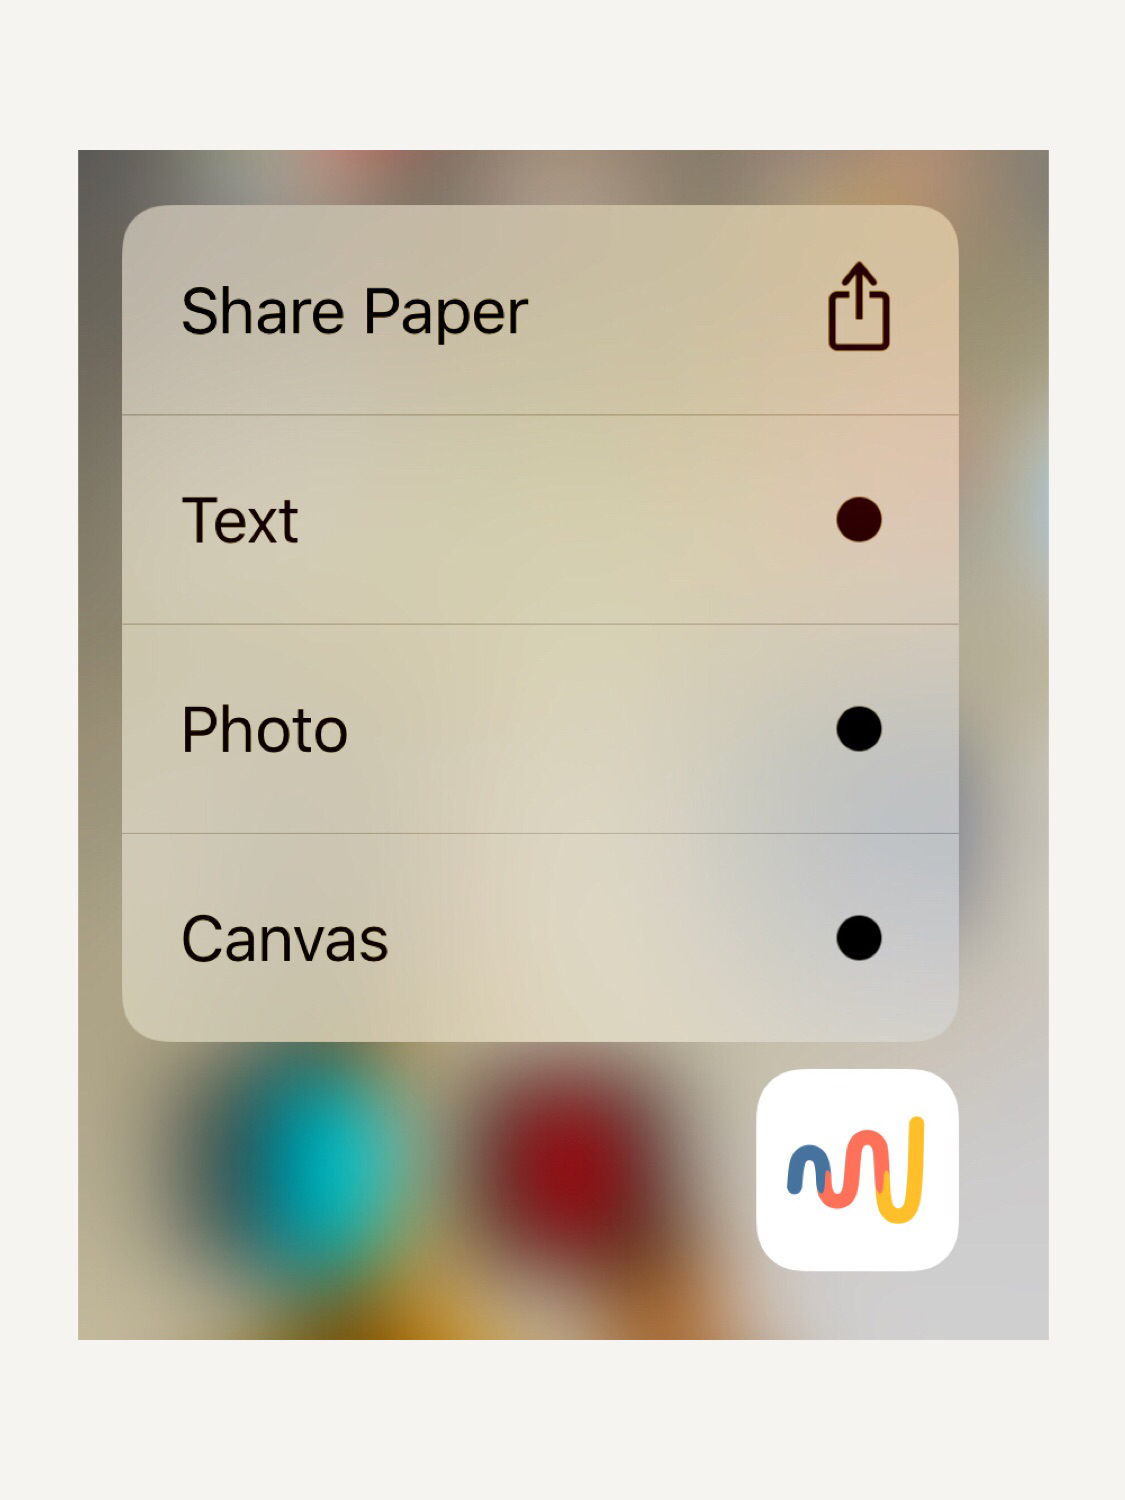 3D Touch actions that are not working.